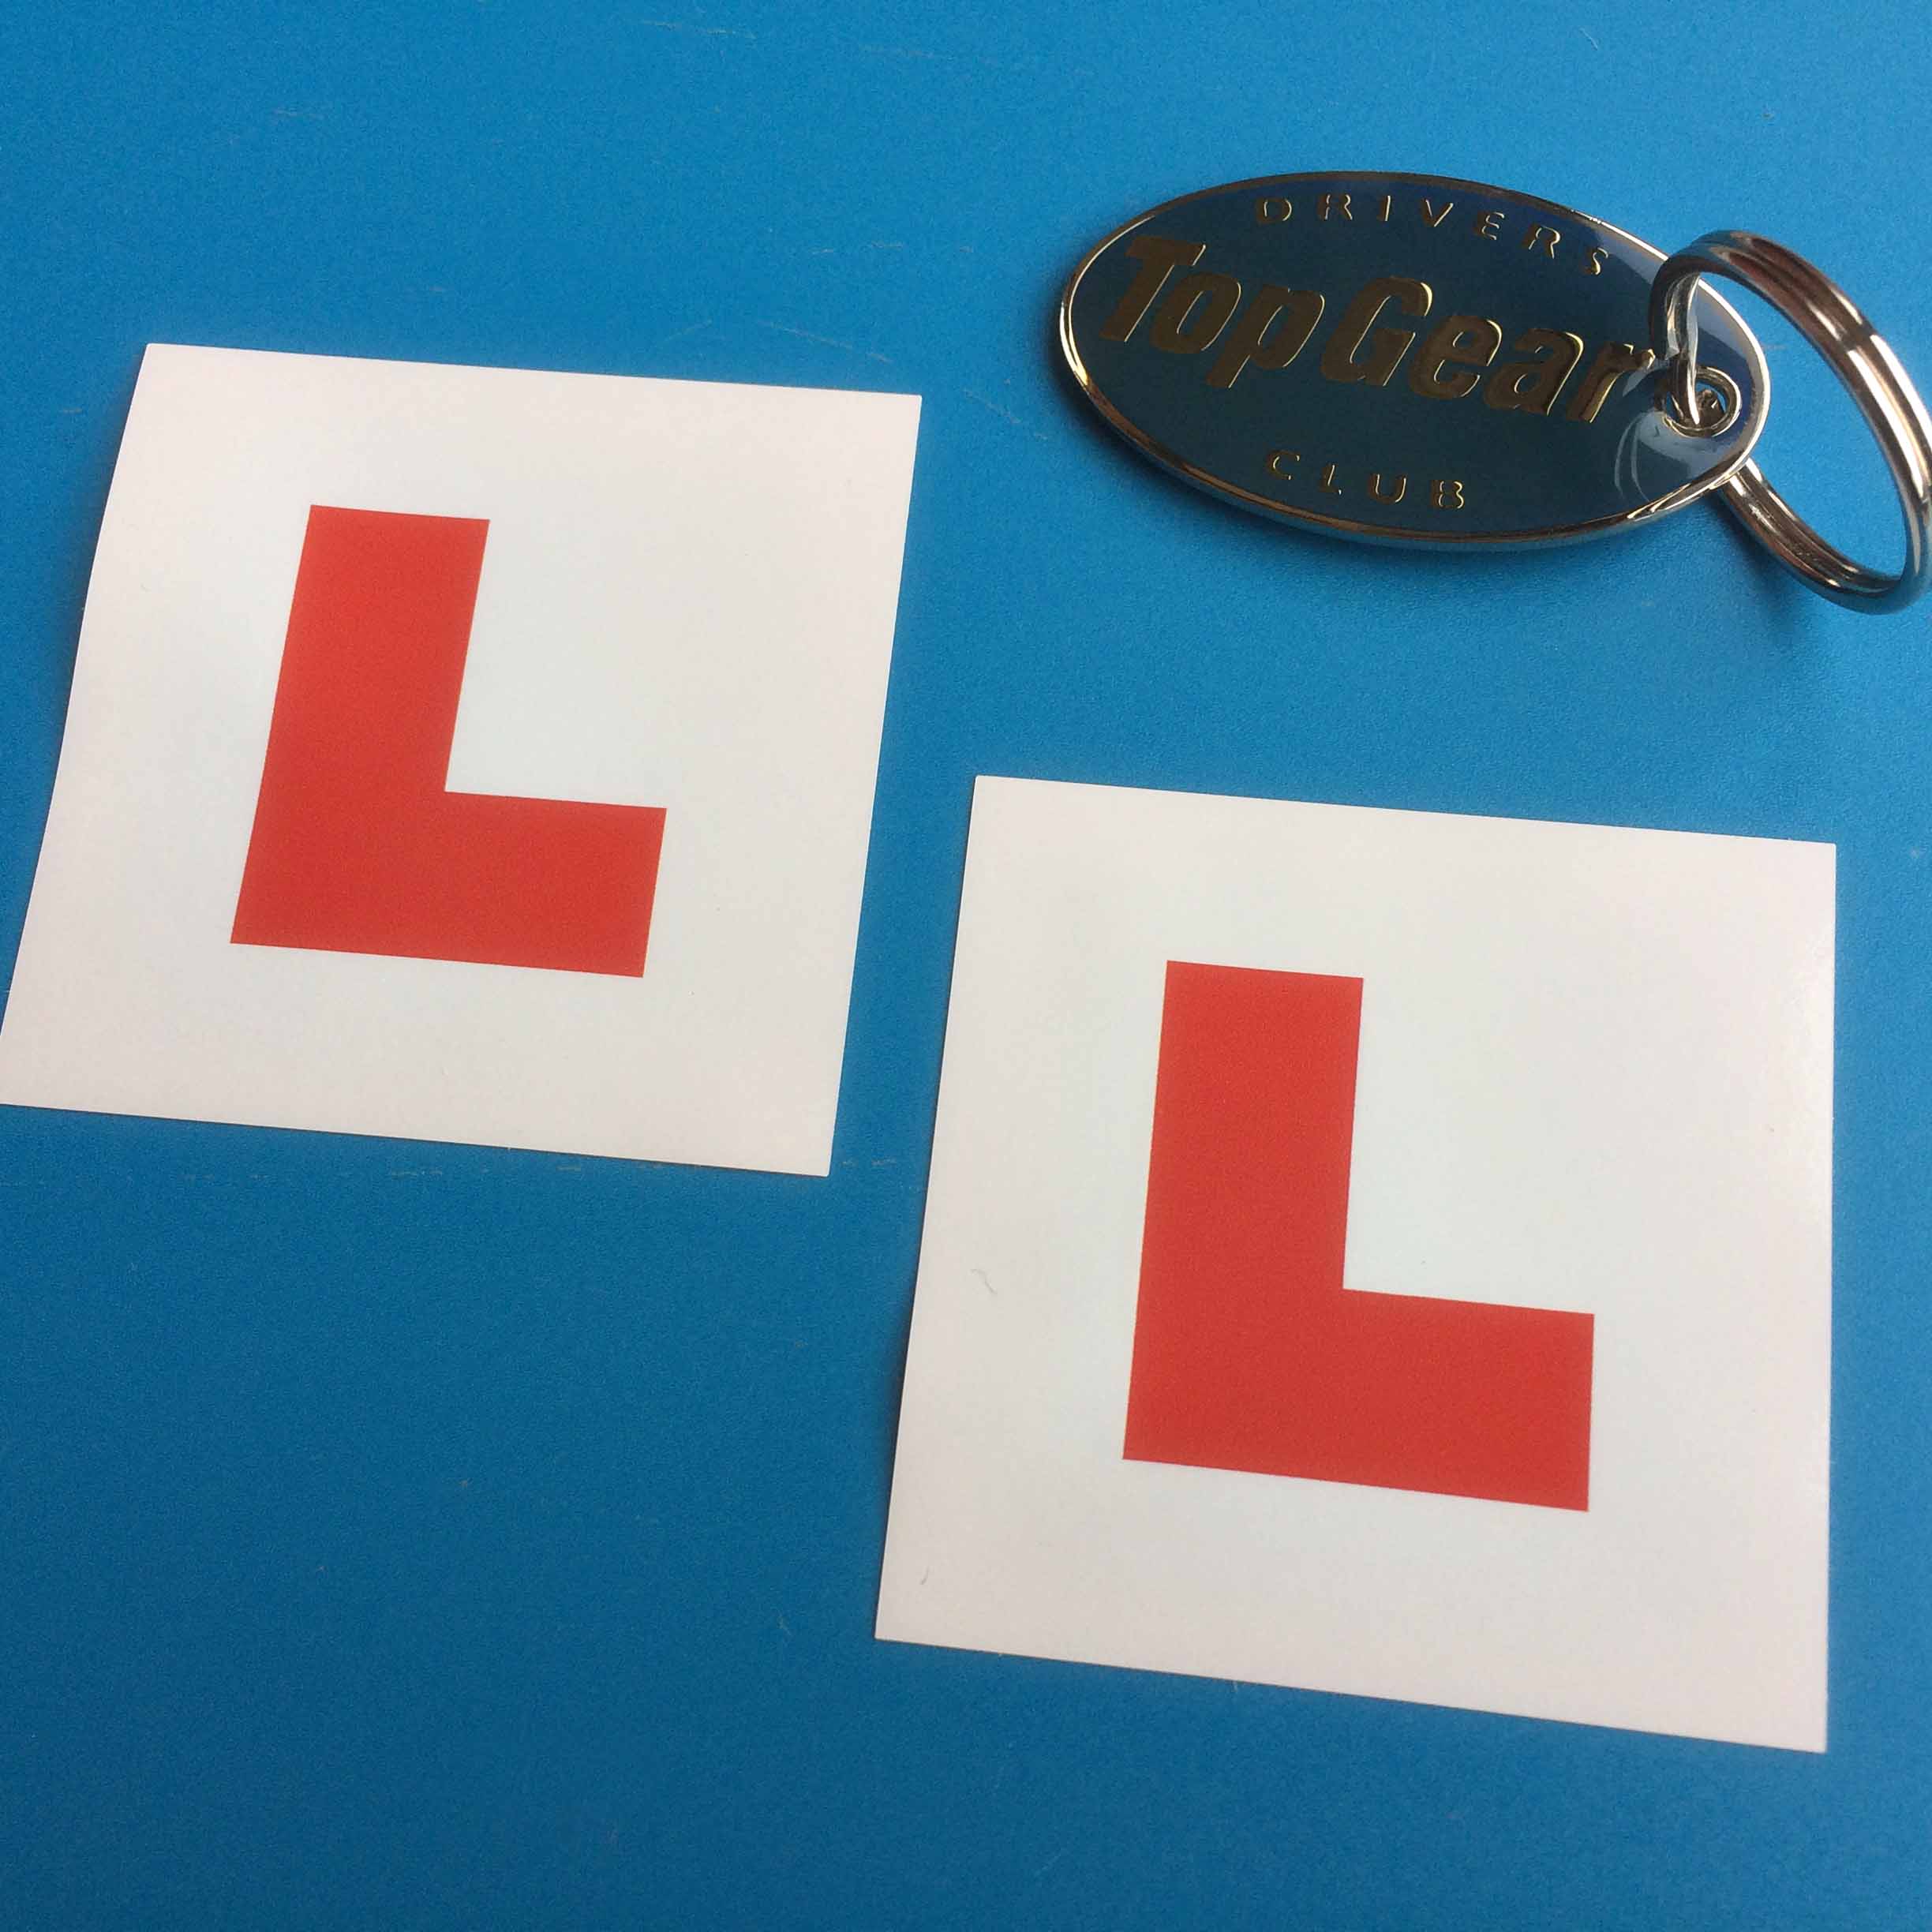 CHILD'S L PLATE STICKERS. Capital L in red on a white background.